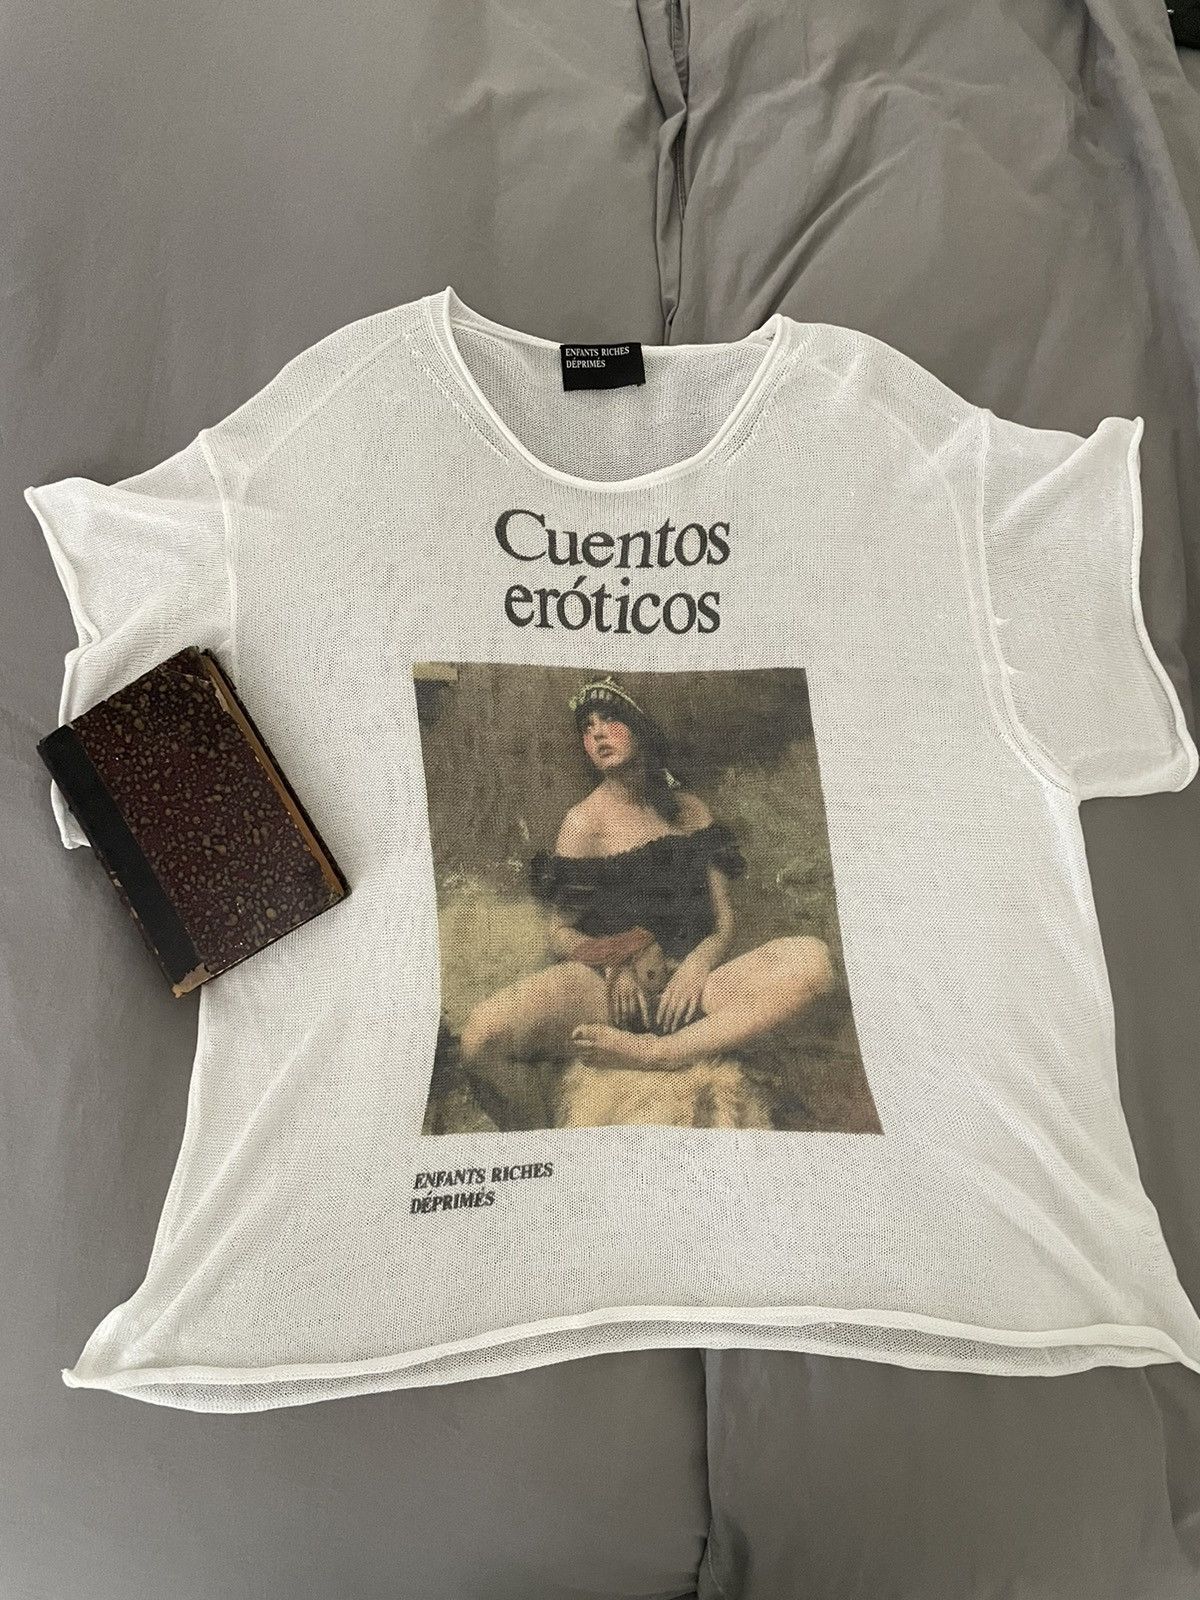 Pre-owned Enfants Riches Deprimes “cuentos Eroticos” Knit Tee - 2019 In White